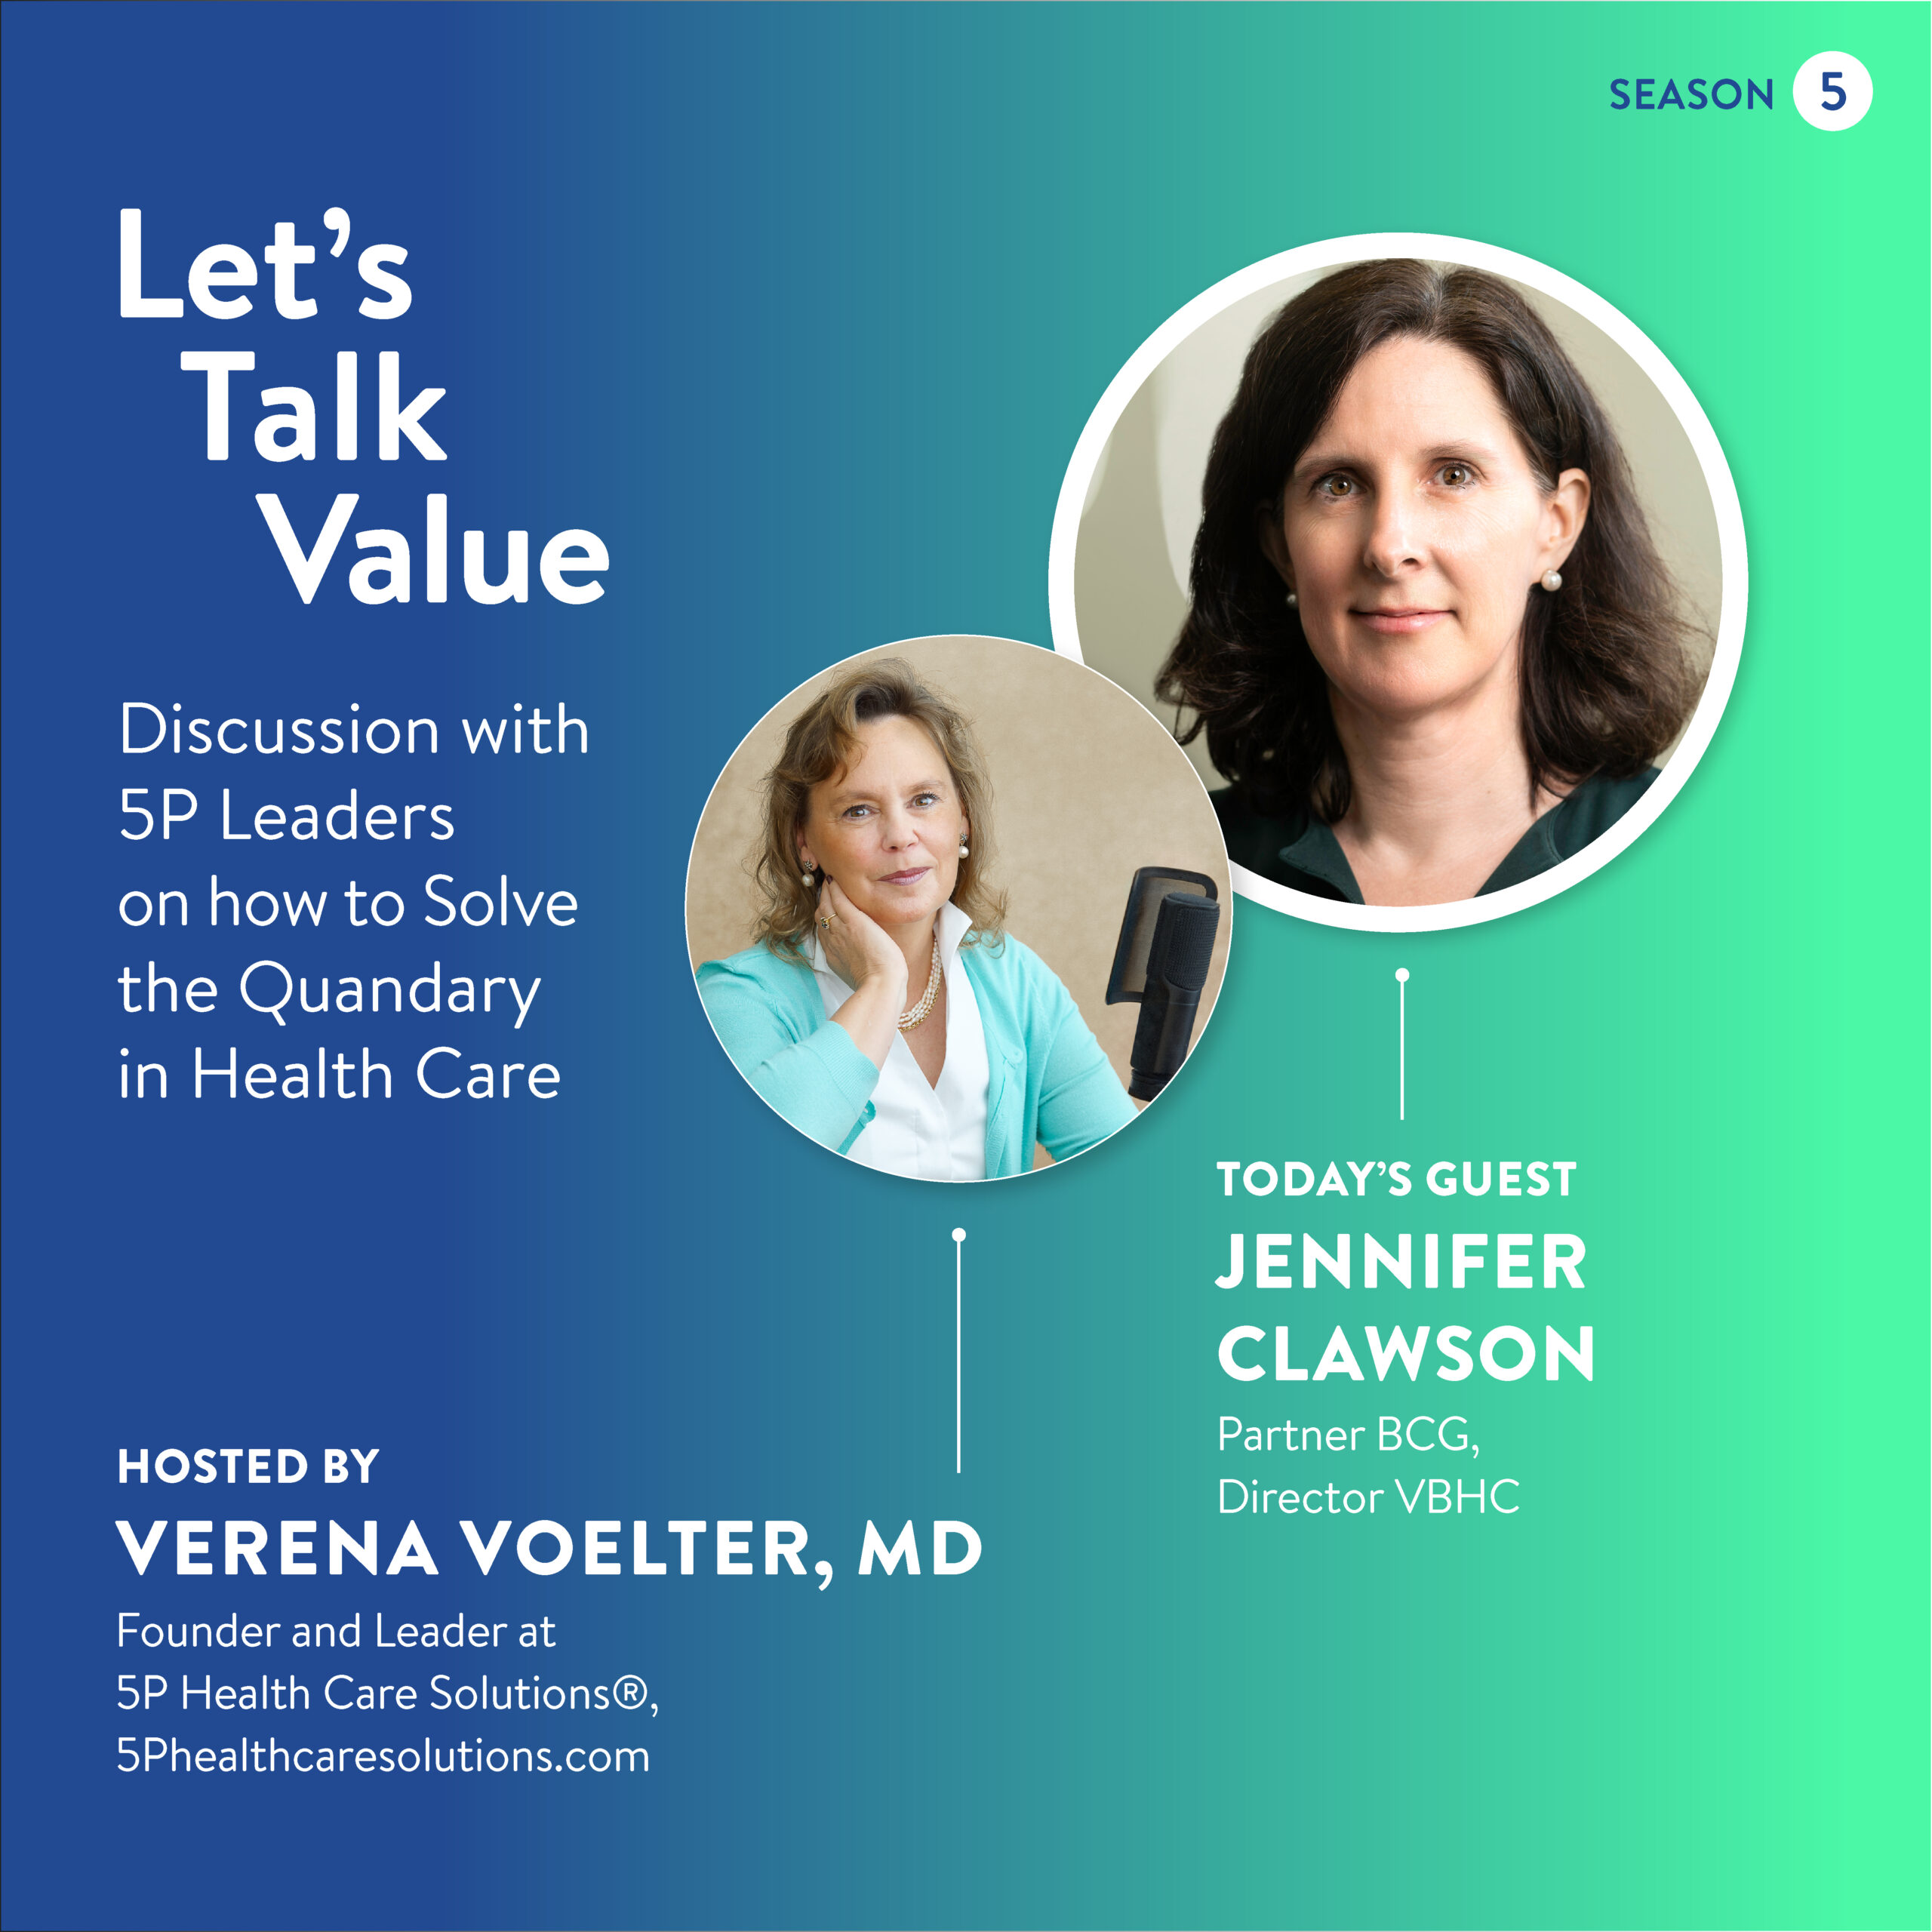 LetsTalkValue with Jennifer Clawson: patient centricity what does that really mean?